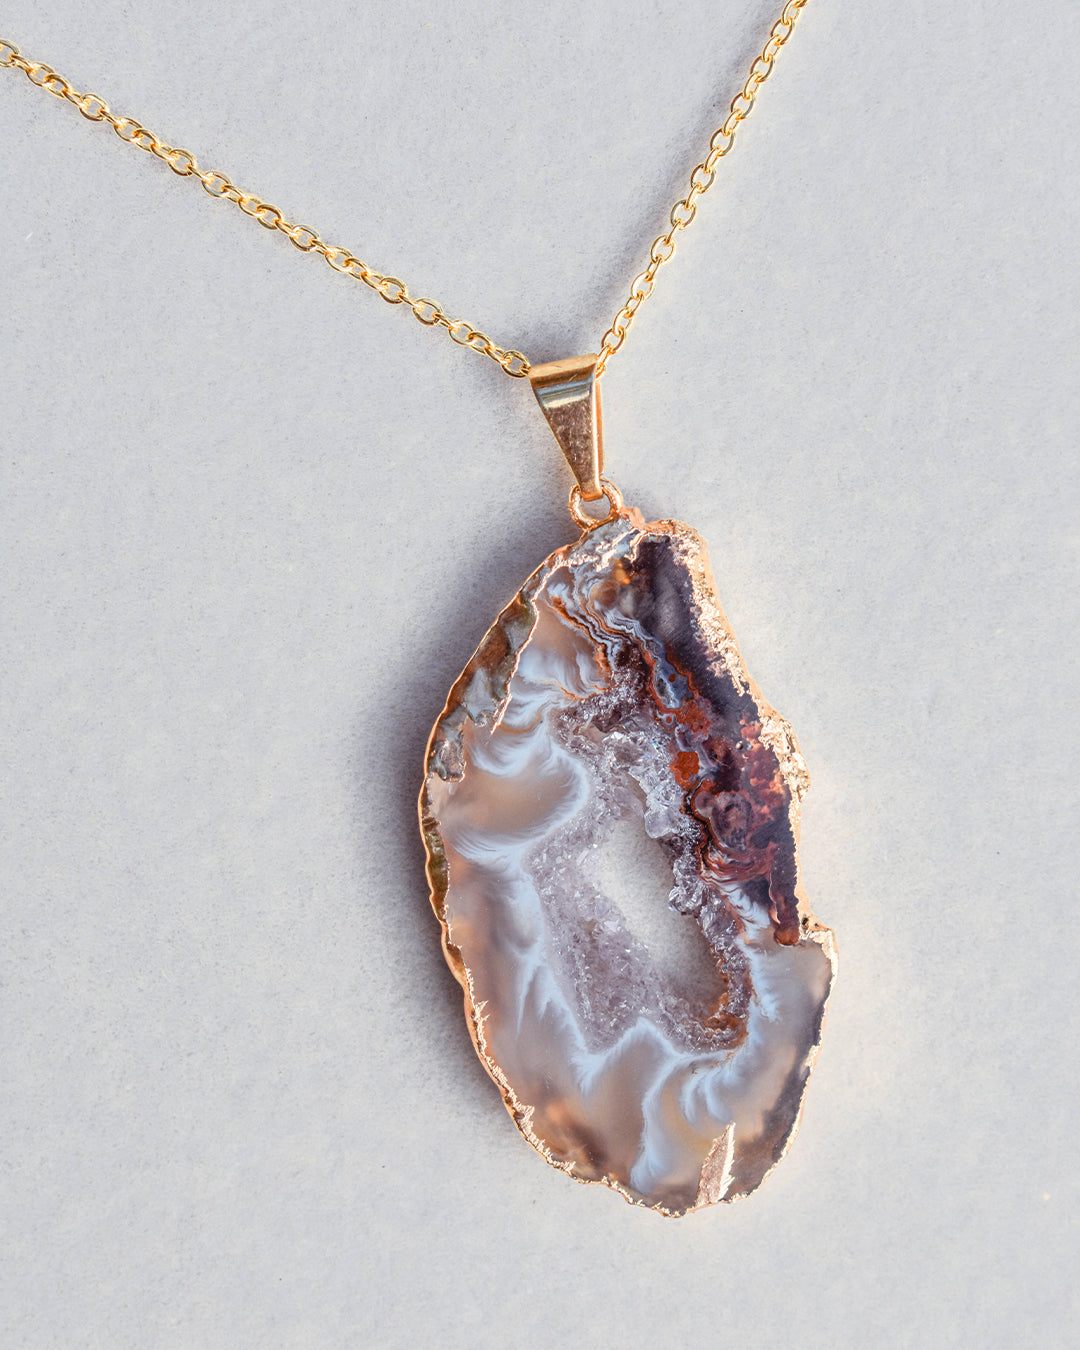 Gold plated chain with Agate crystal pendant